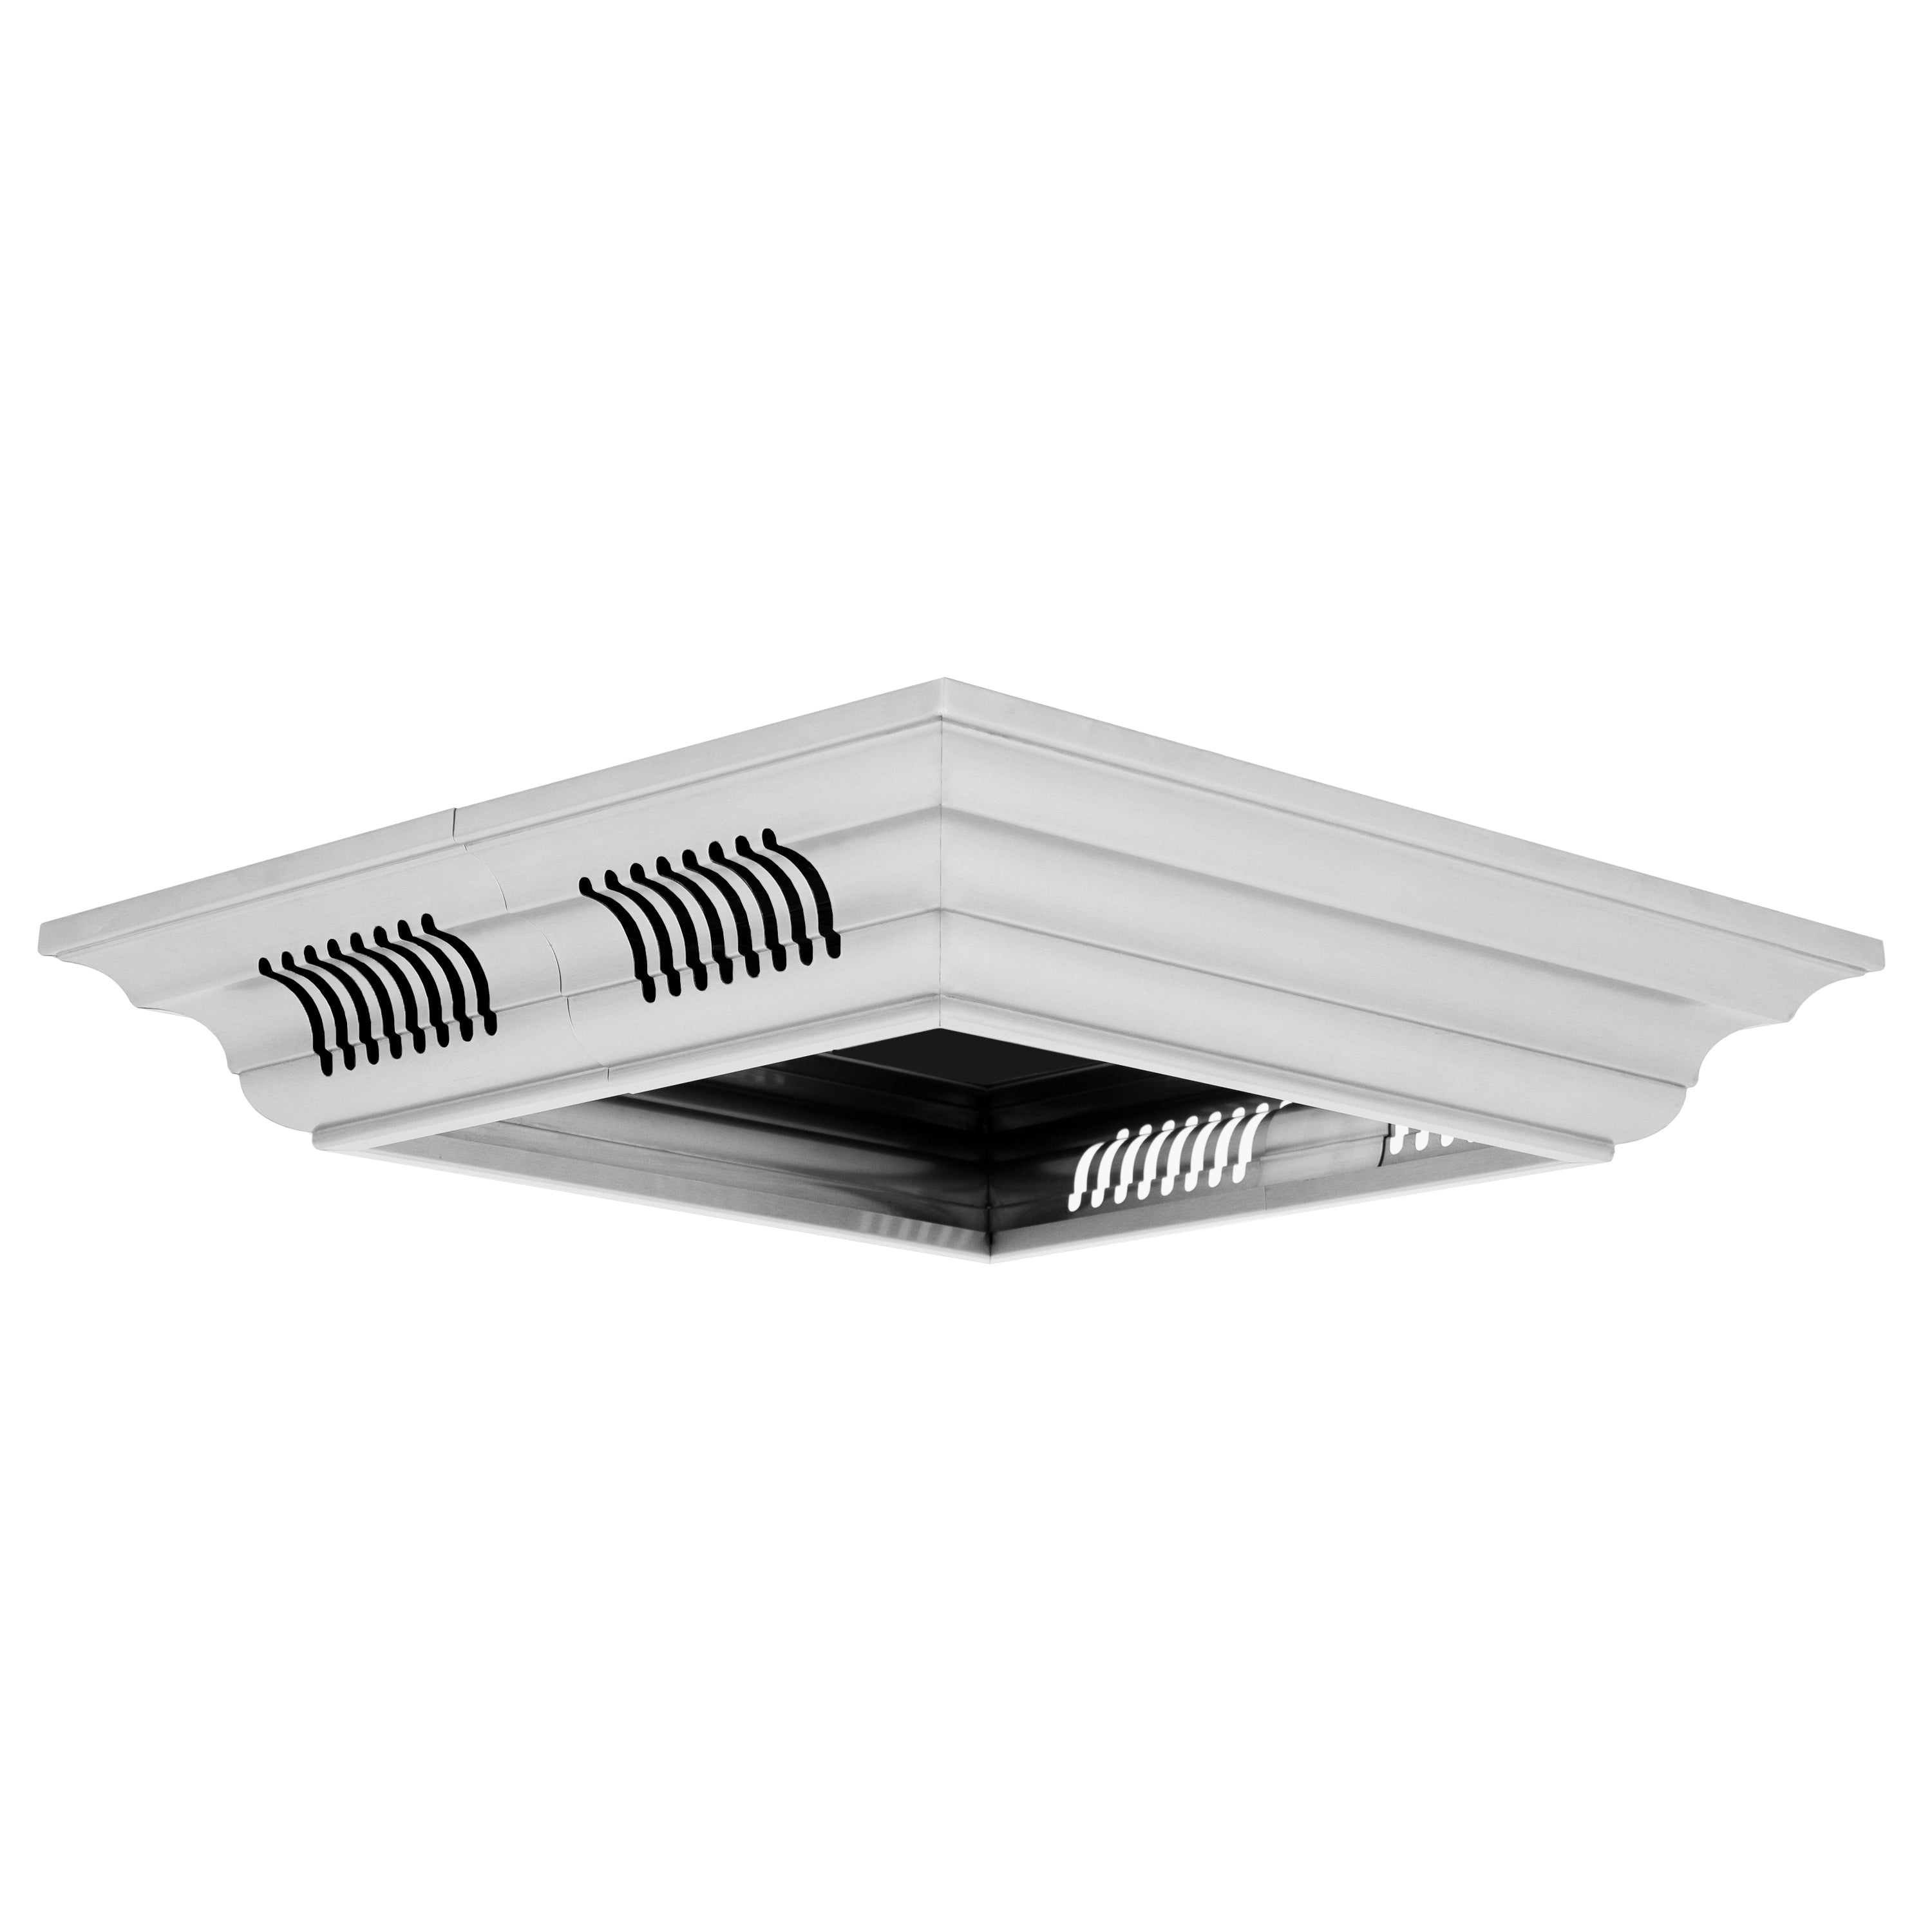 ZLINE Crown Molding in Stainless Steel with Built-in Bluetooth Speakers (CM6-BT-GL5i)